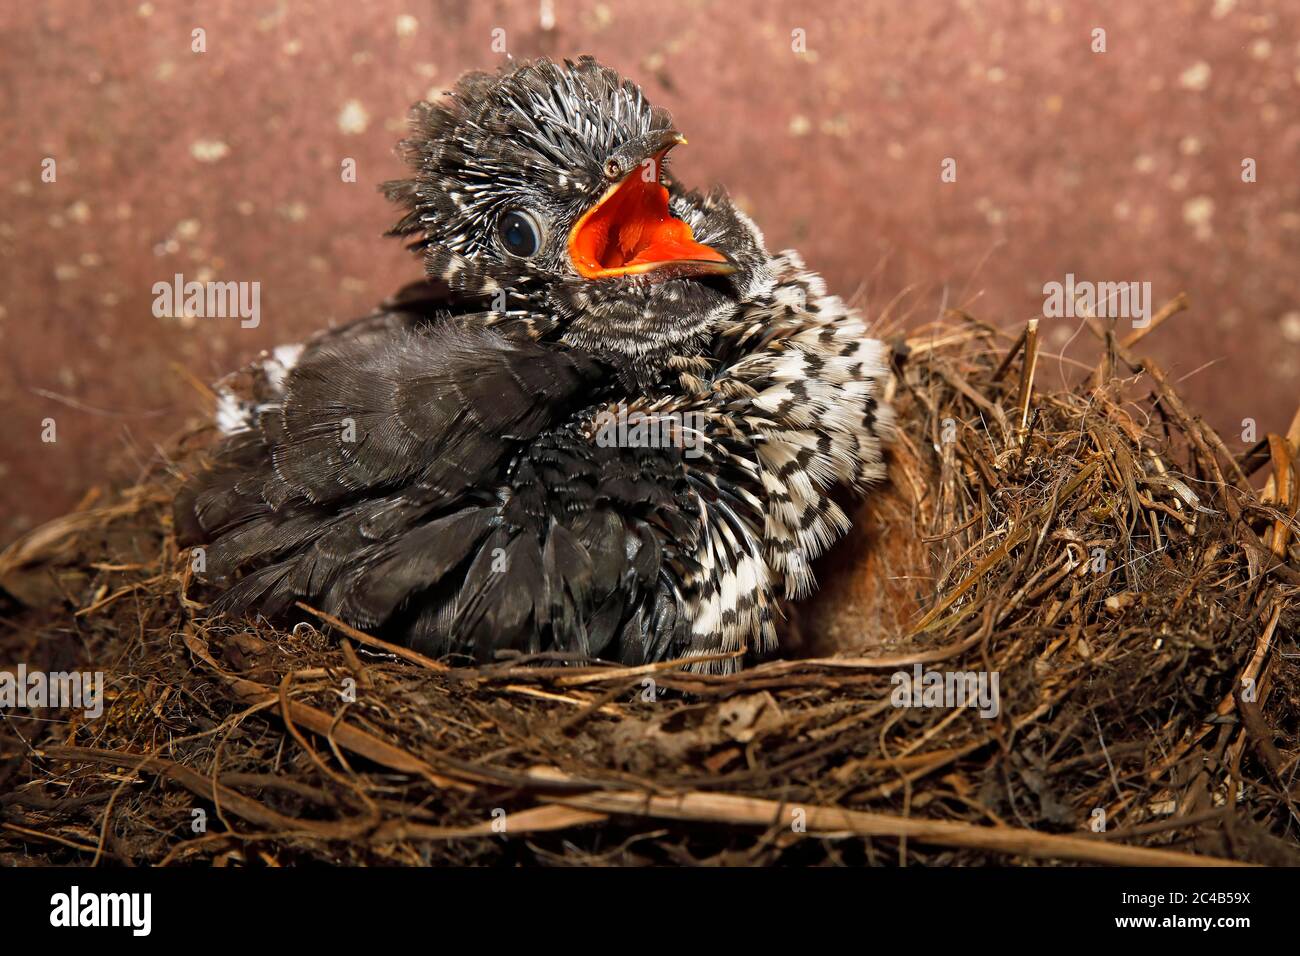 Young Common cuckoo (Cuculus canorus) sitting in the nest, Nestling, Schleswig-Holstein, Germany Stock Photo